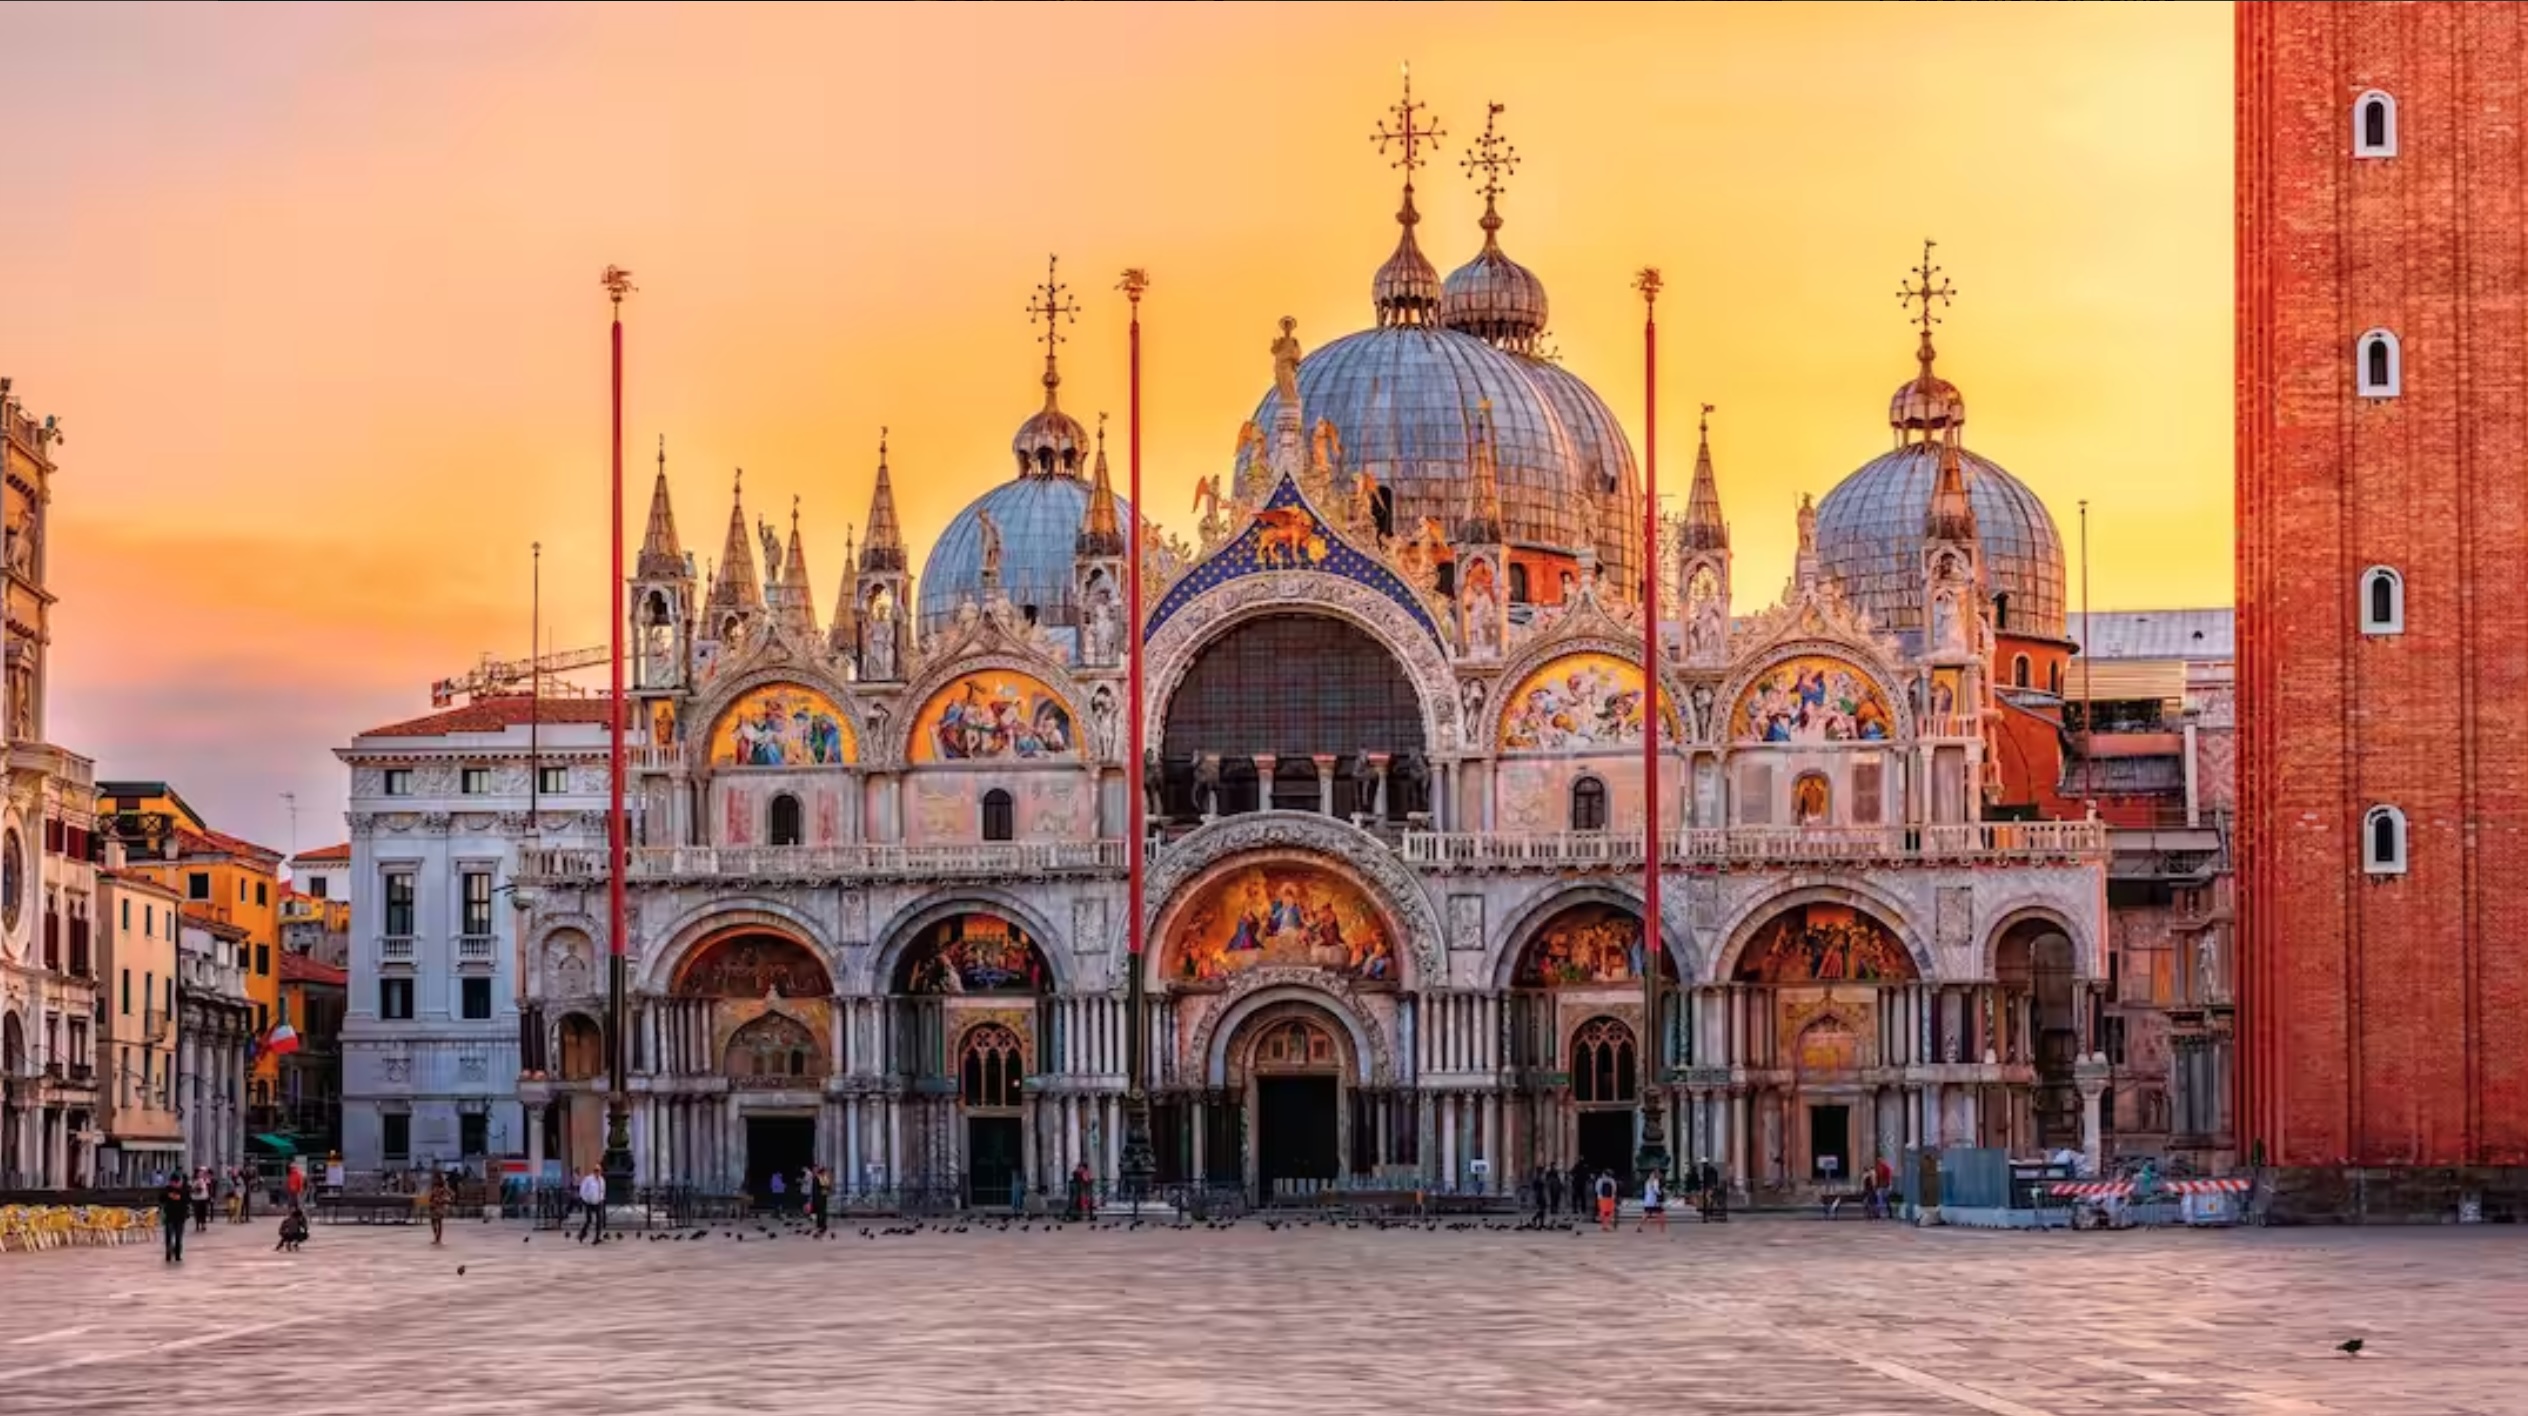 Basilica di San Marco and on piazza San Marco in Venice, Italy